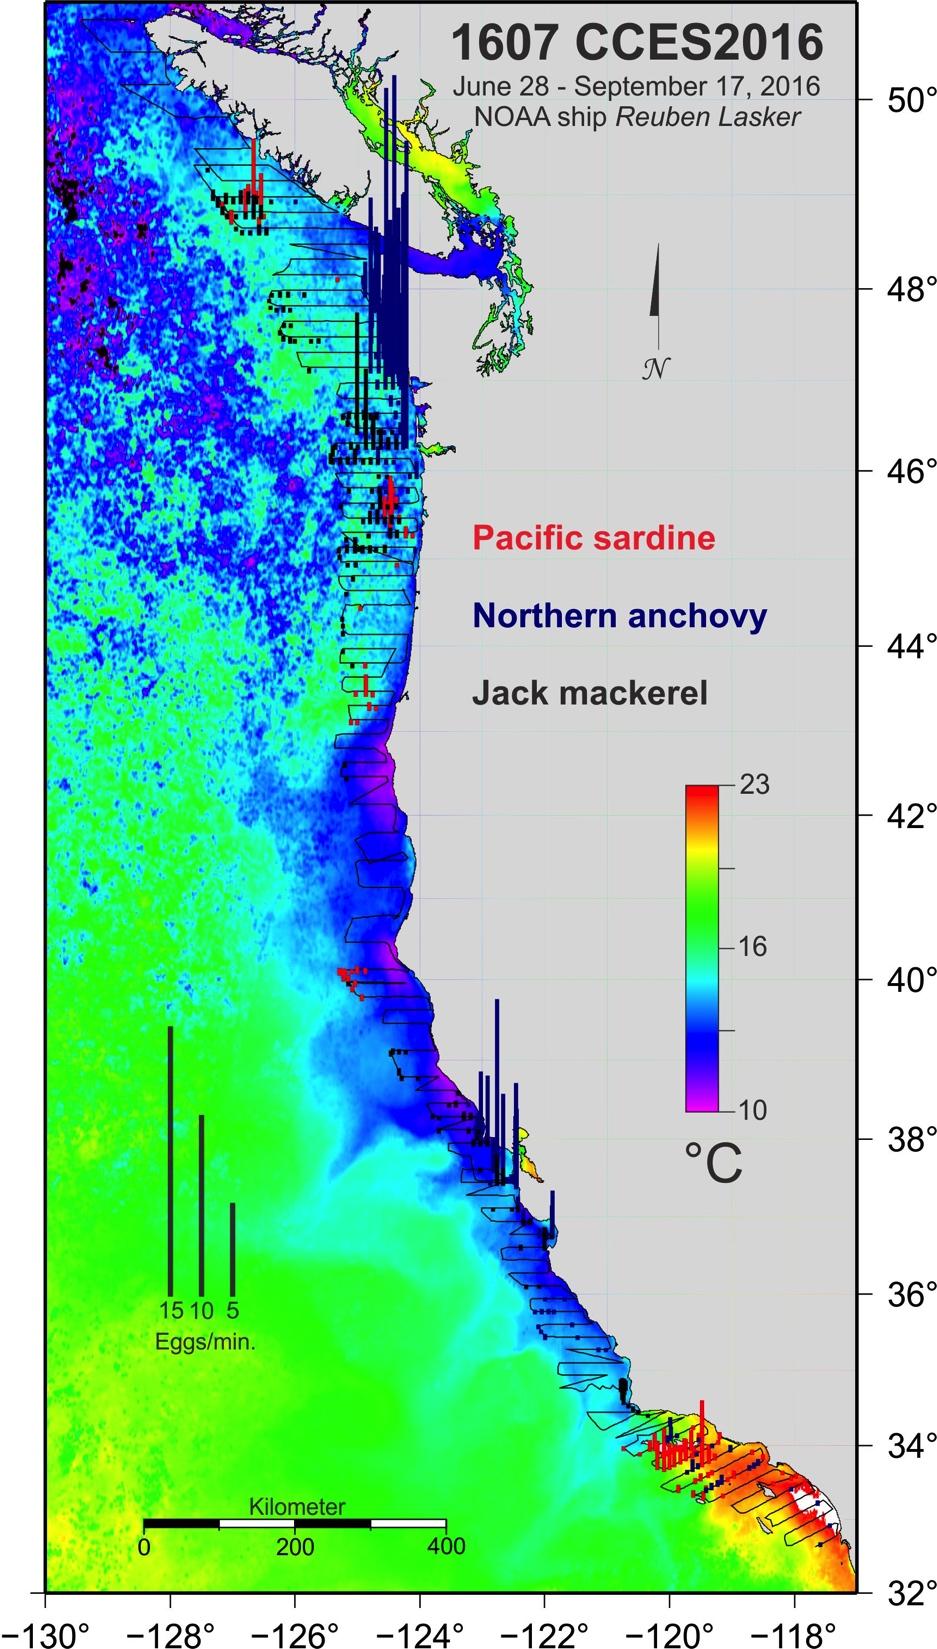 2016: Lasker returned from 3 months surveying the CPS complex (sardine, anchovy, Pacific mackerel, jack mackerel, market